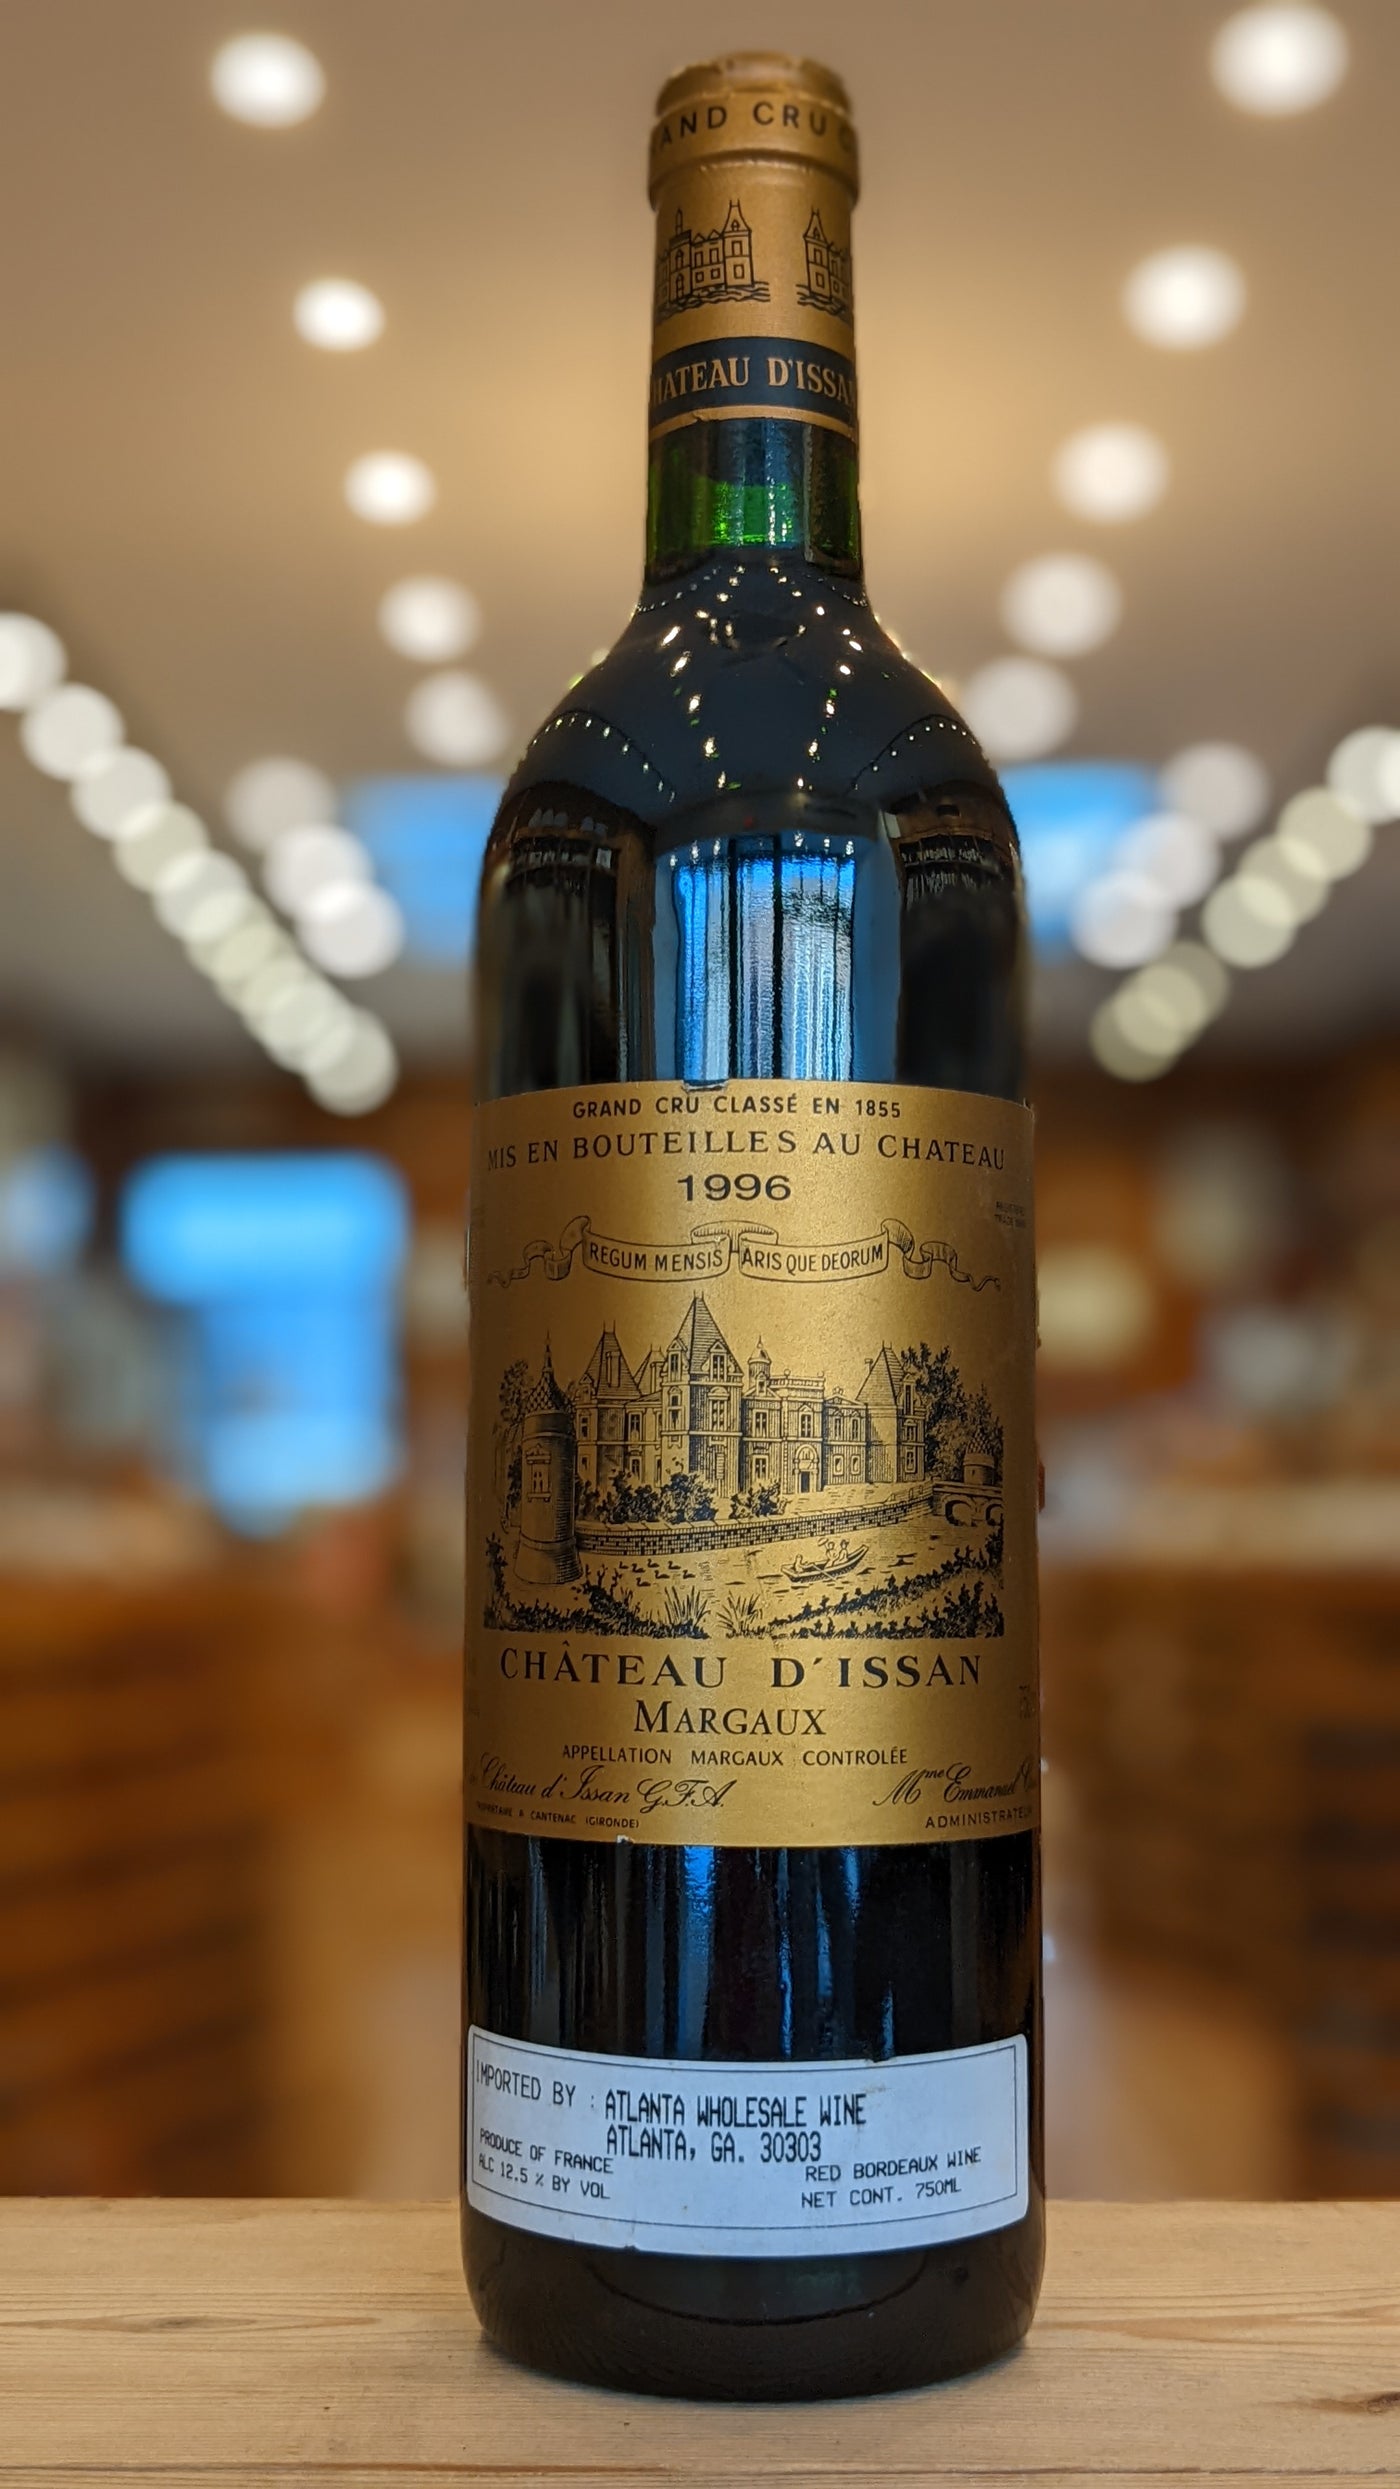 Chateau d'Issan Margaux 1996